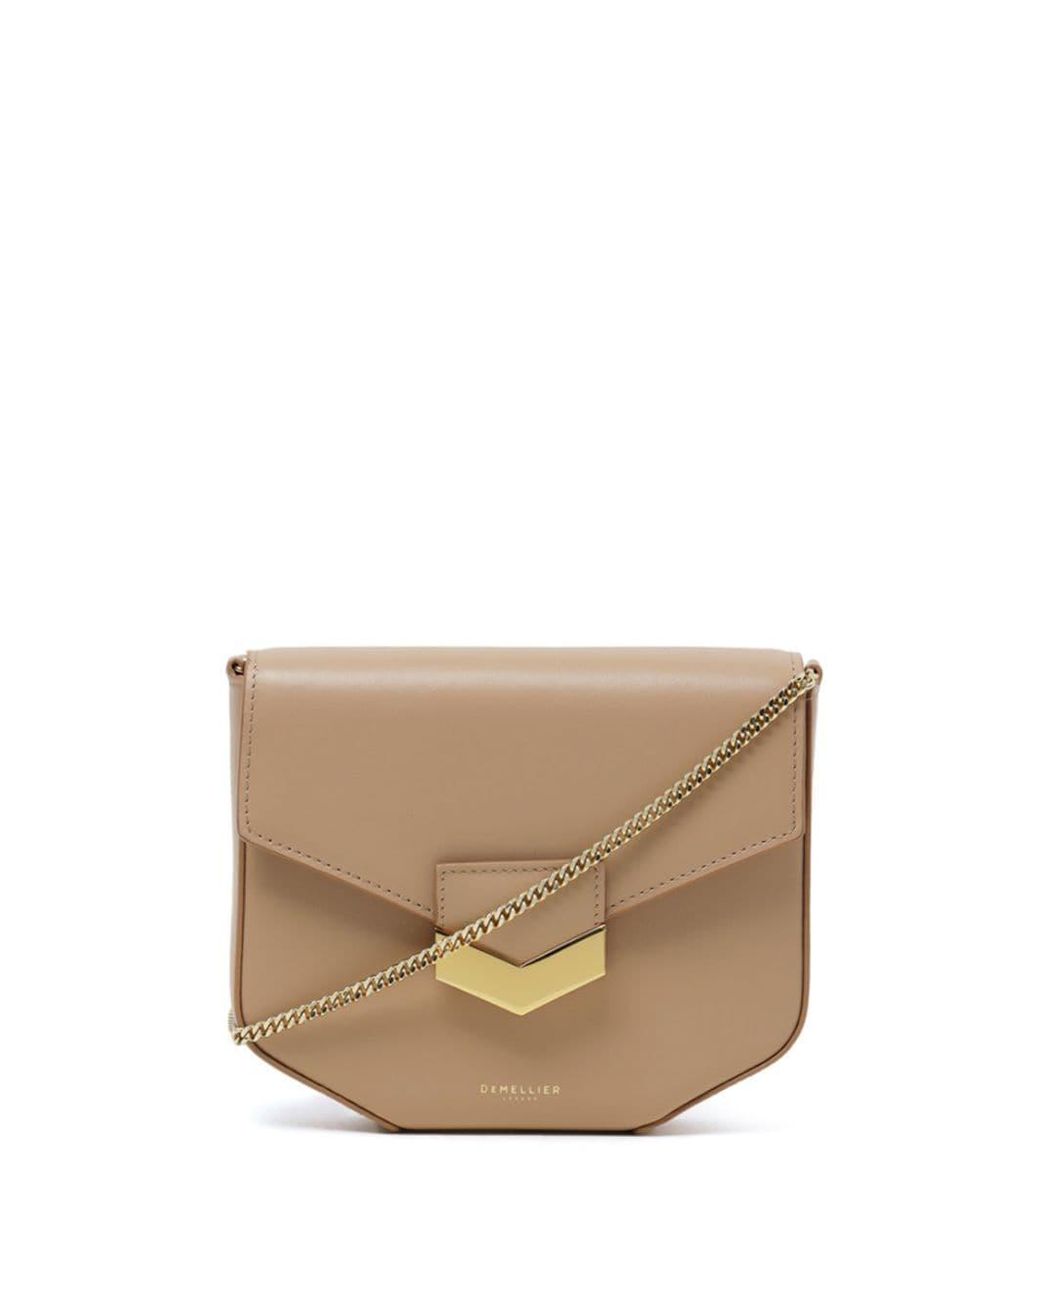 DeMellier London Leather Mini Bag in Natural | Lyst